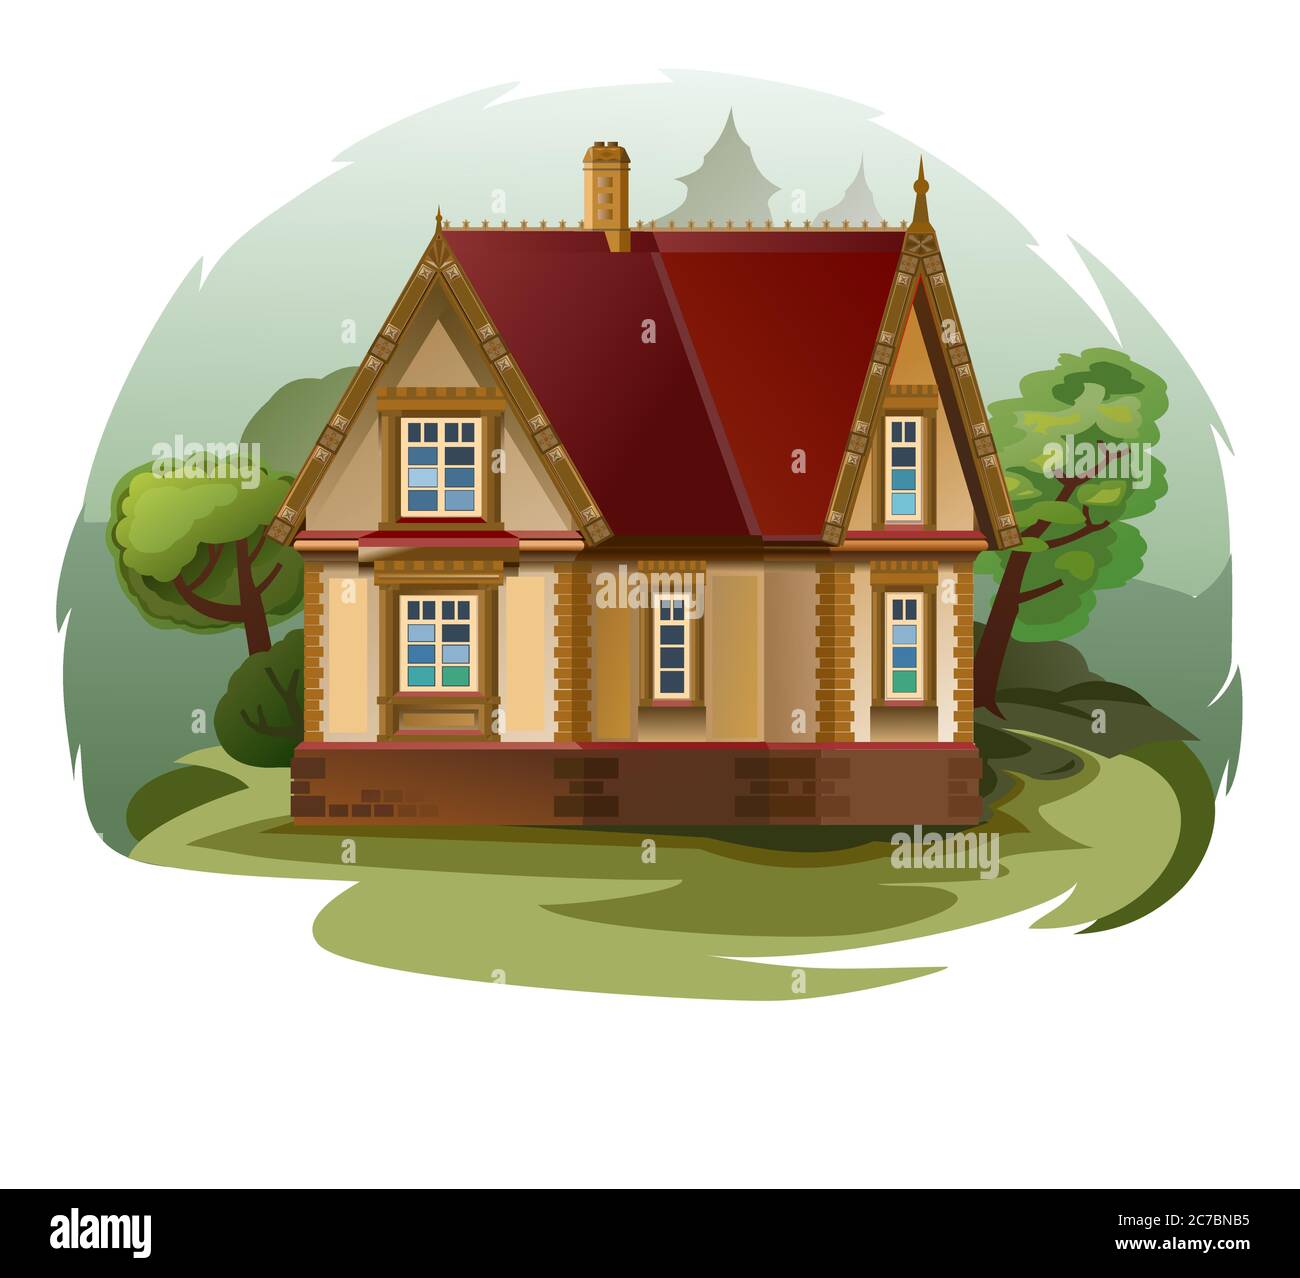 Exterior of an old house. Isolated vector illustration. Cracked walls, doors, windows. Still a cozy home. Little simple rustic lodge. Cartoon rural Stock Vector